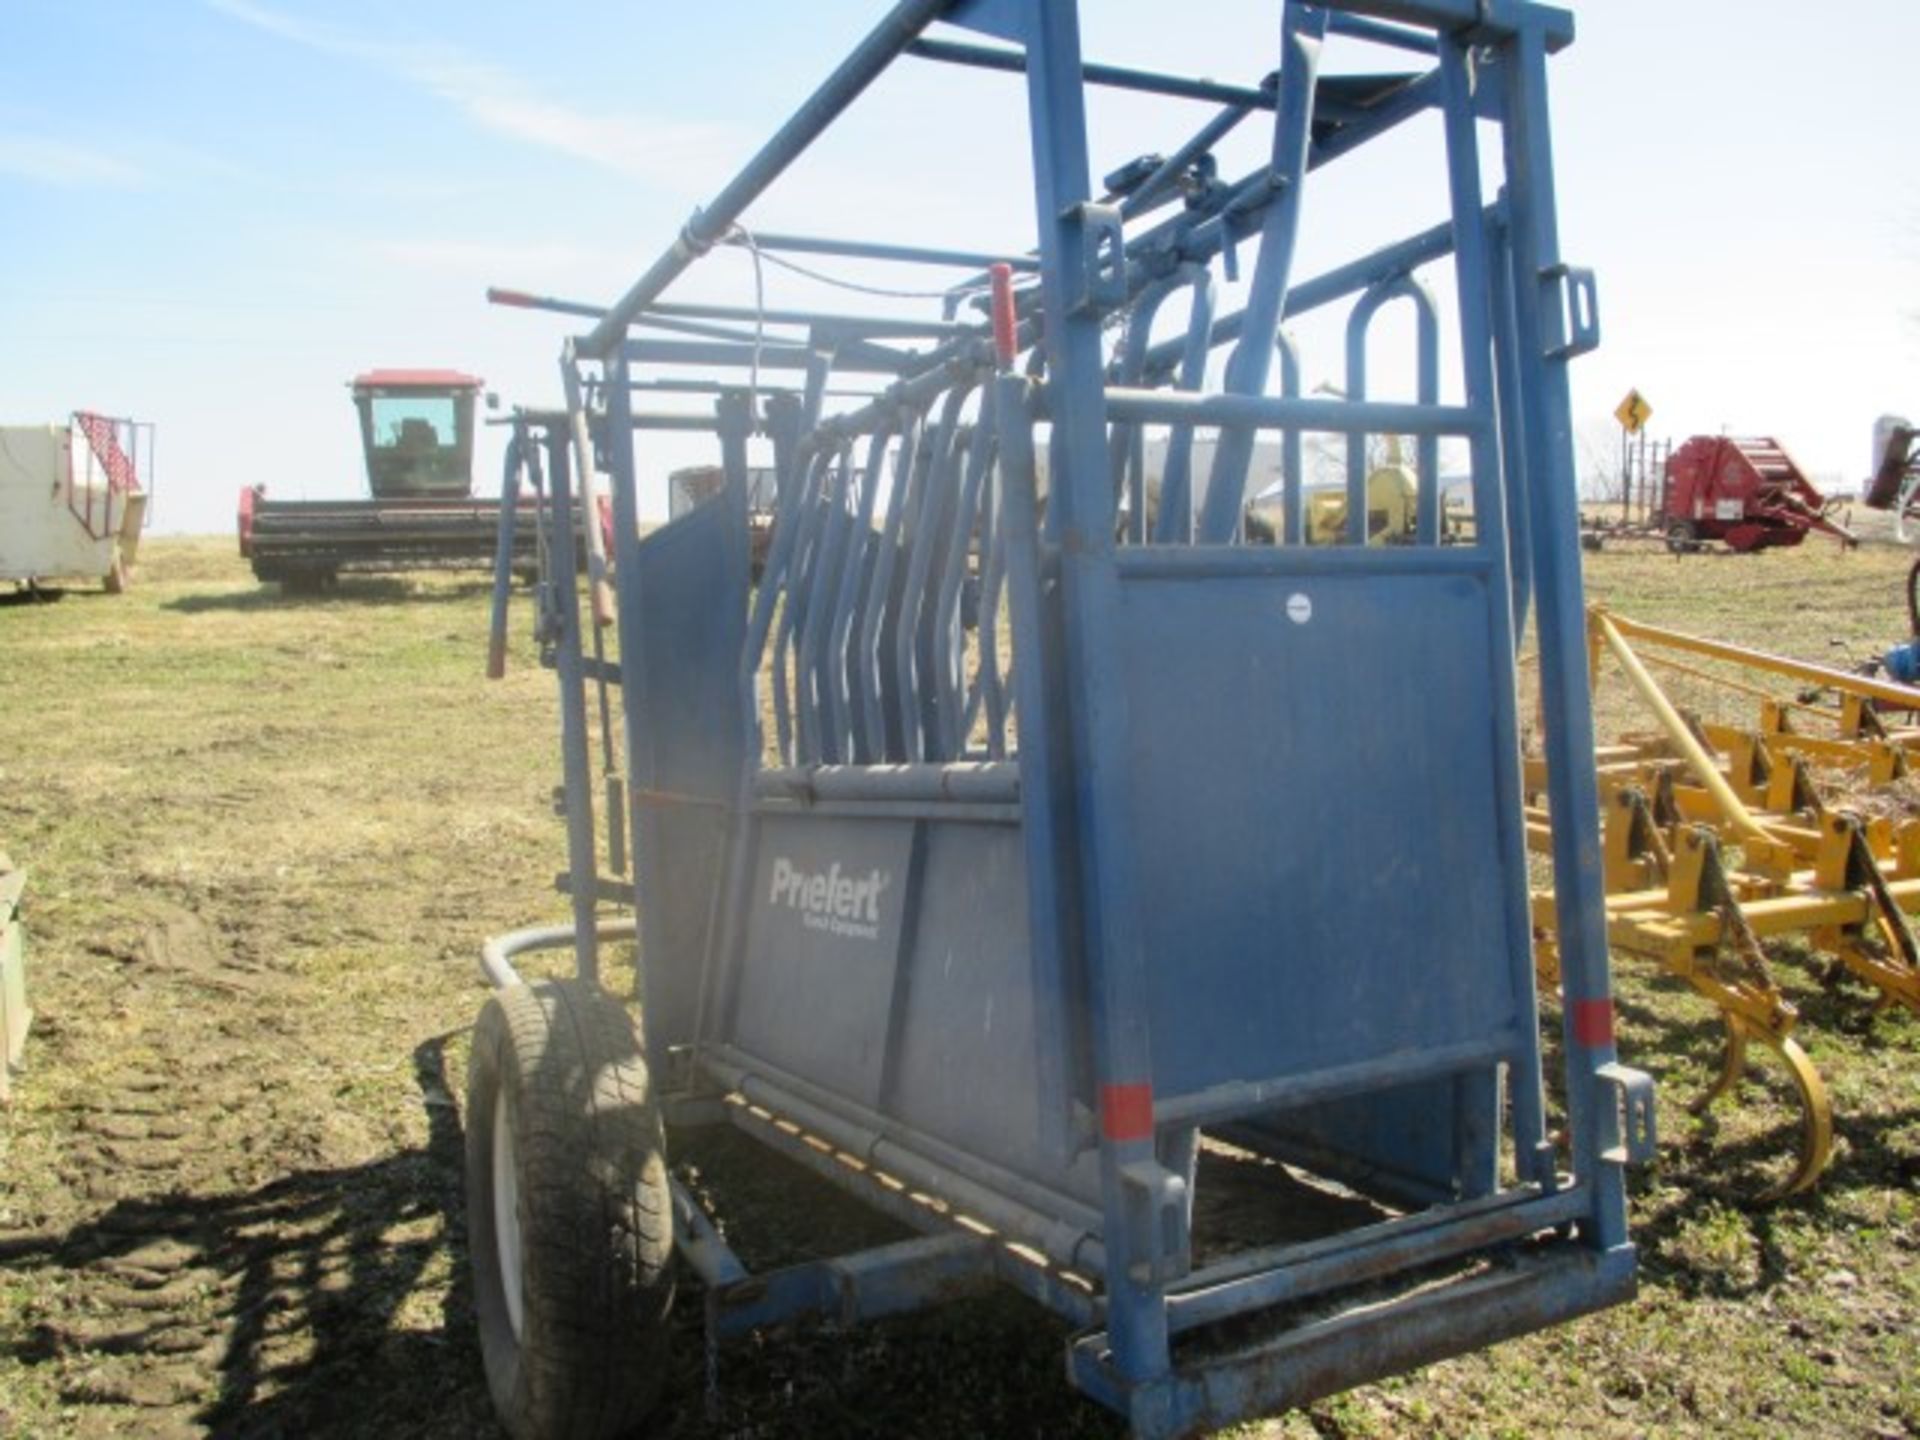 PrieFert portable squeeze chute, head gate - Image 2 of 3